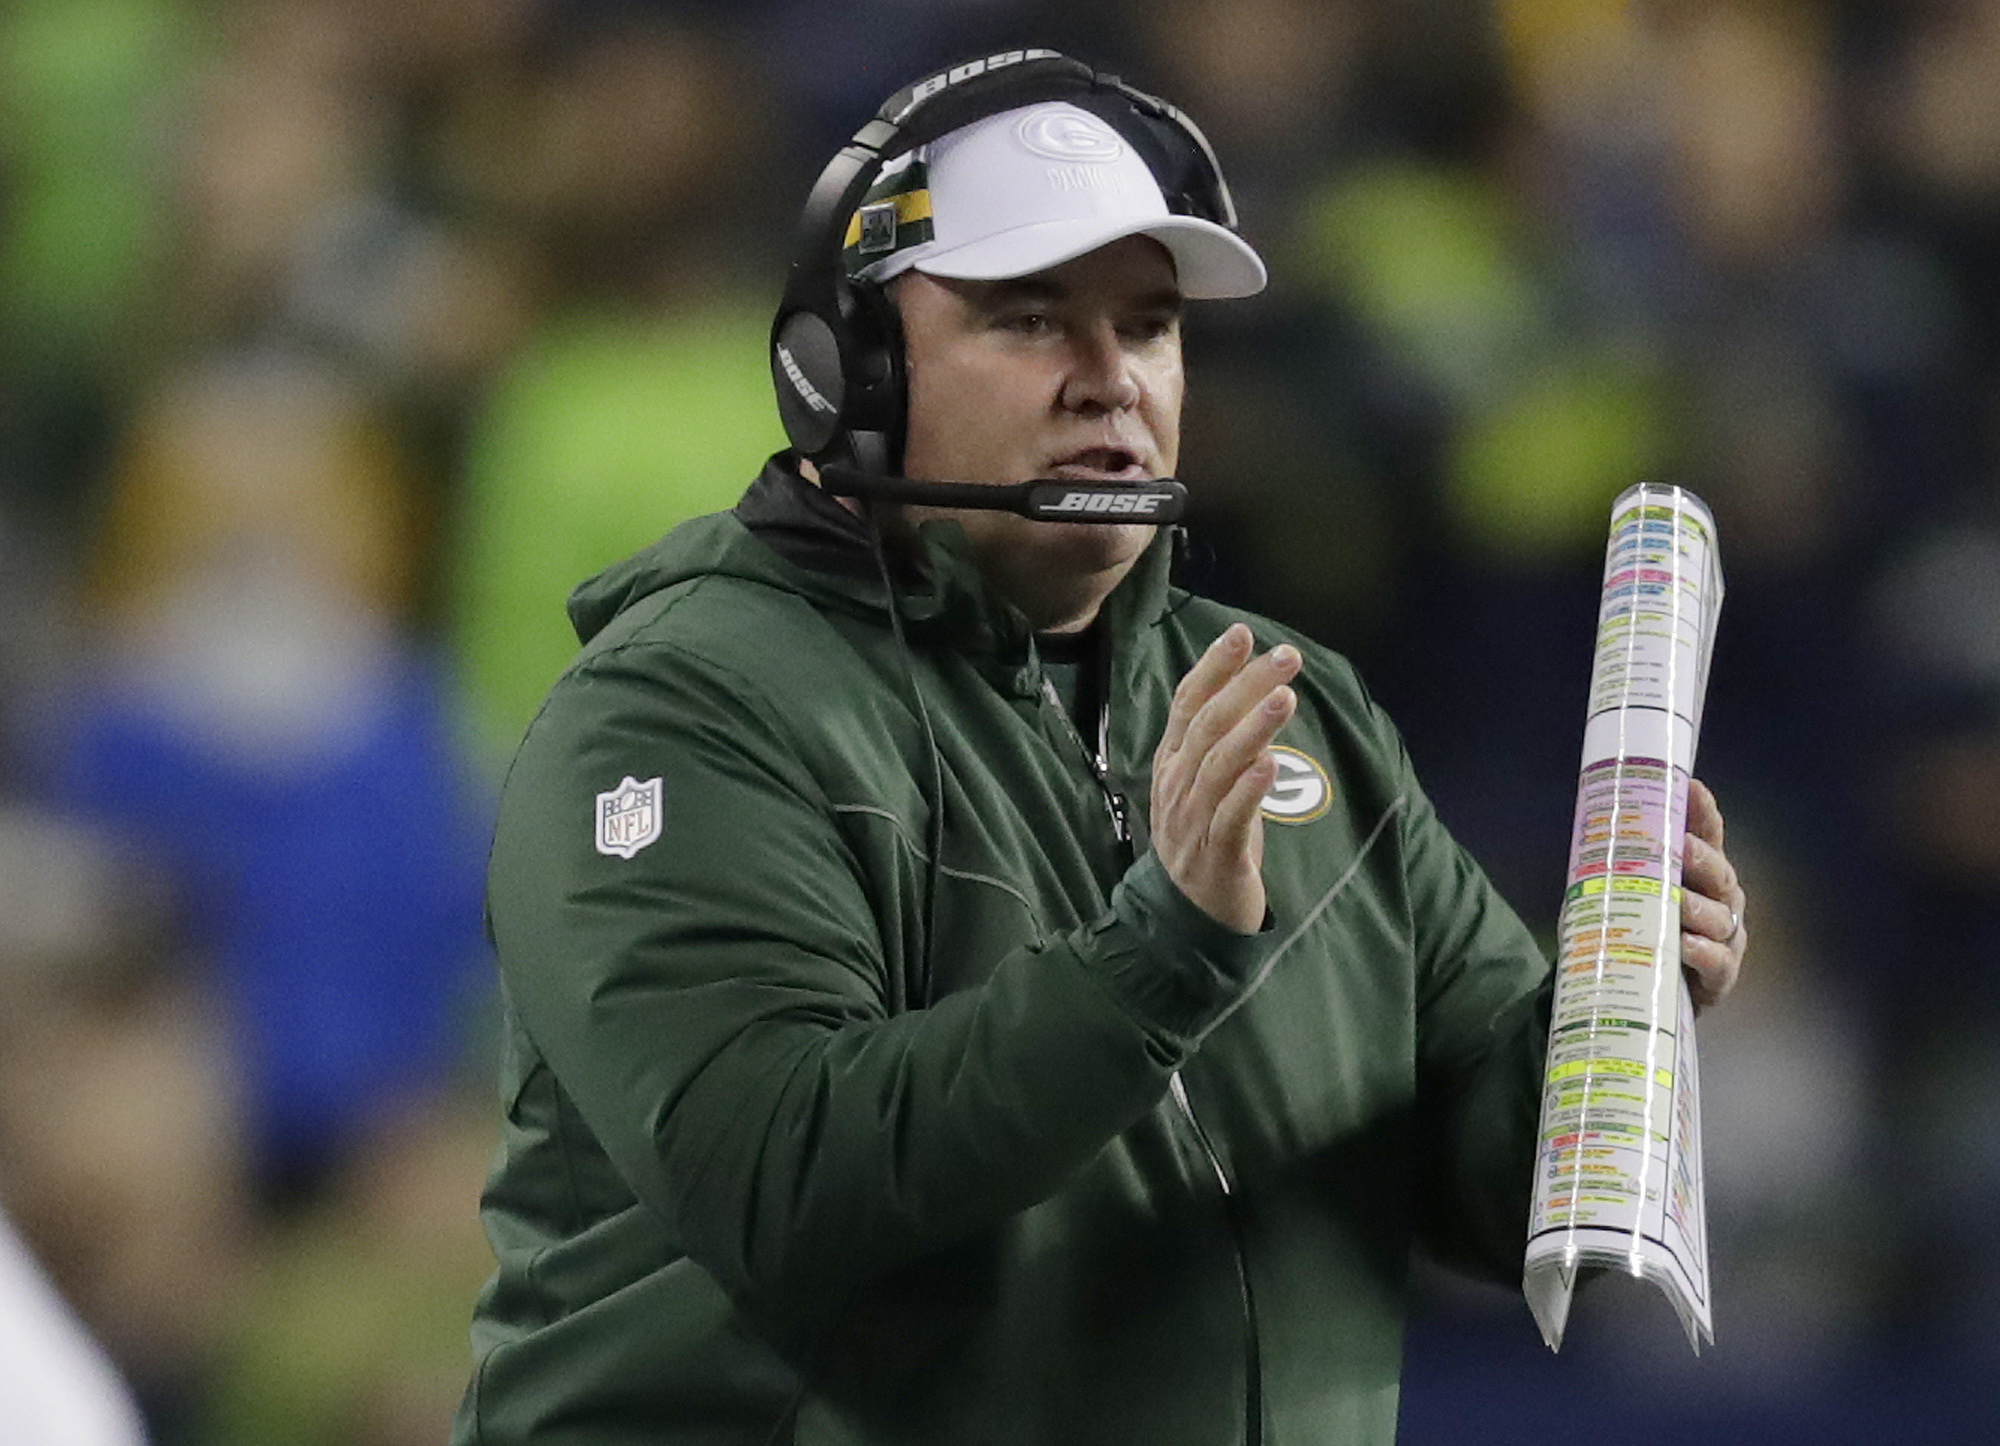 On hot seat? Packers' McCarthy focuses on getting road win